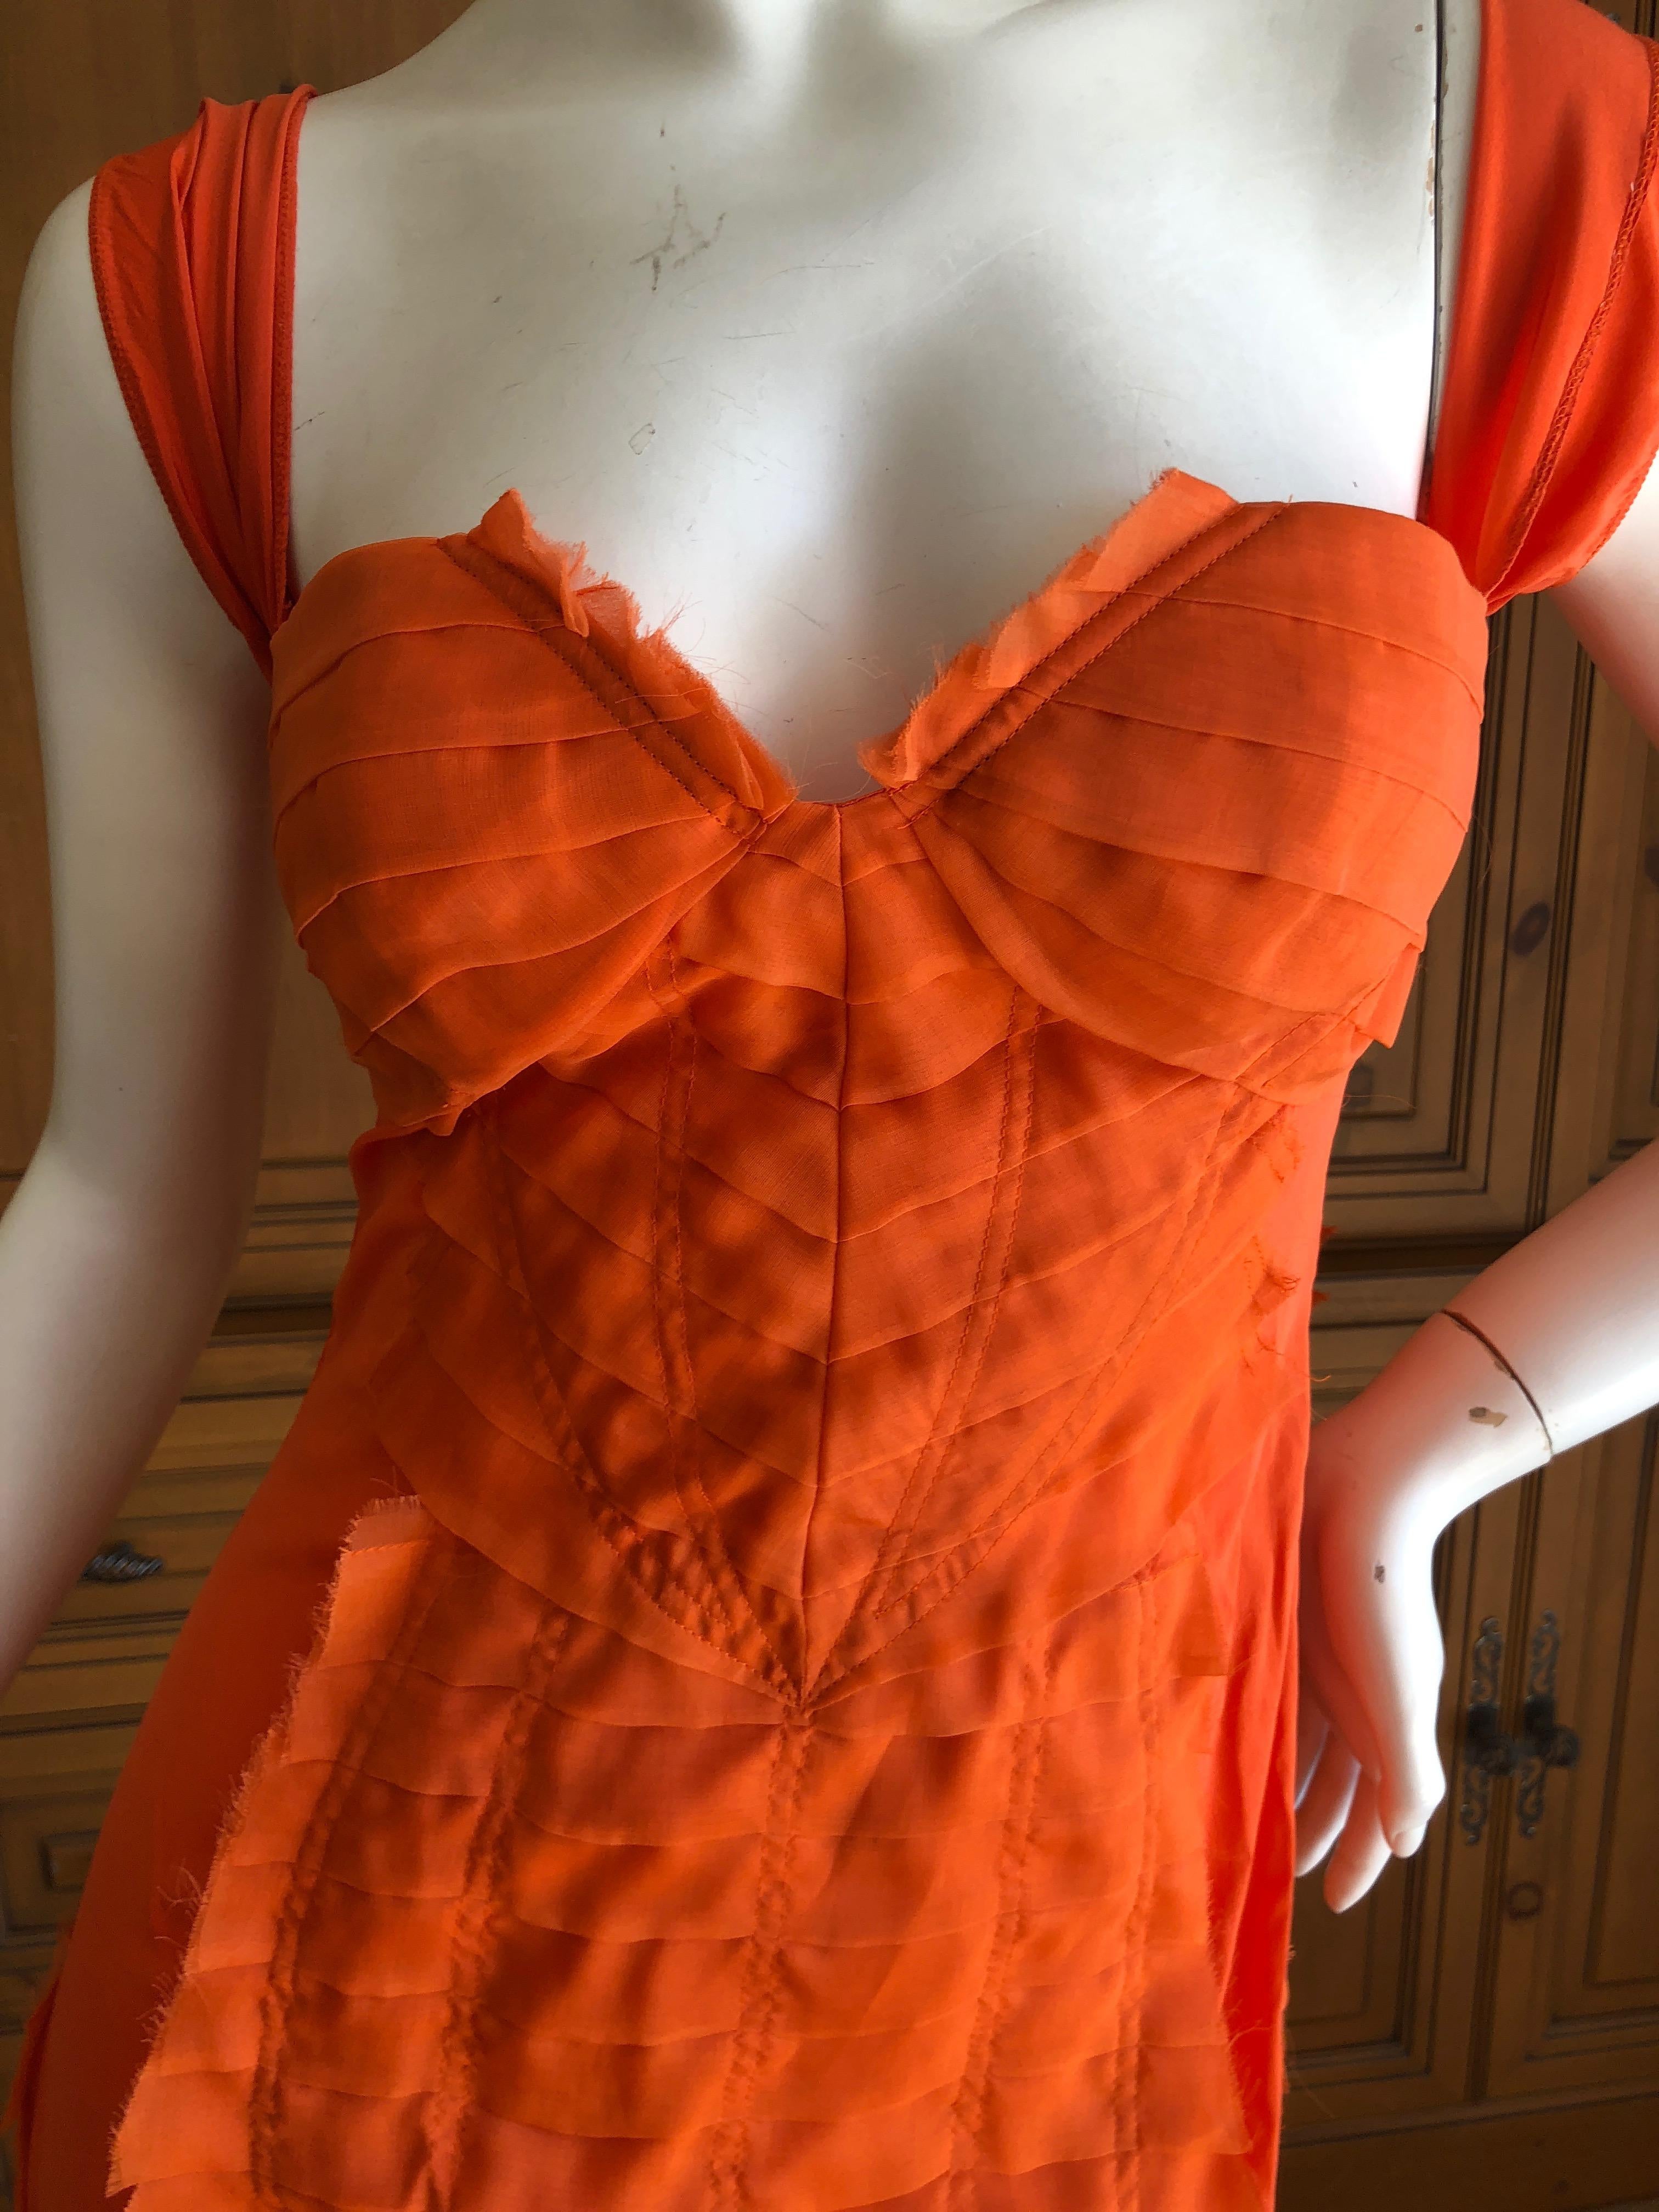 Gucci by Tom Ford 2004 Orange Ribbon Dress Tom Ford Book Piece New Tags In New Condition For Sale In Cloverdale, CA